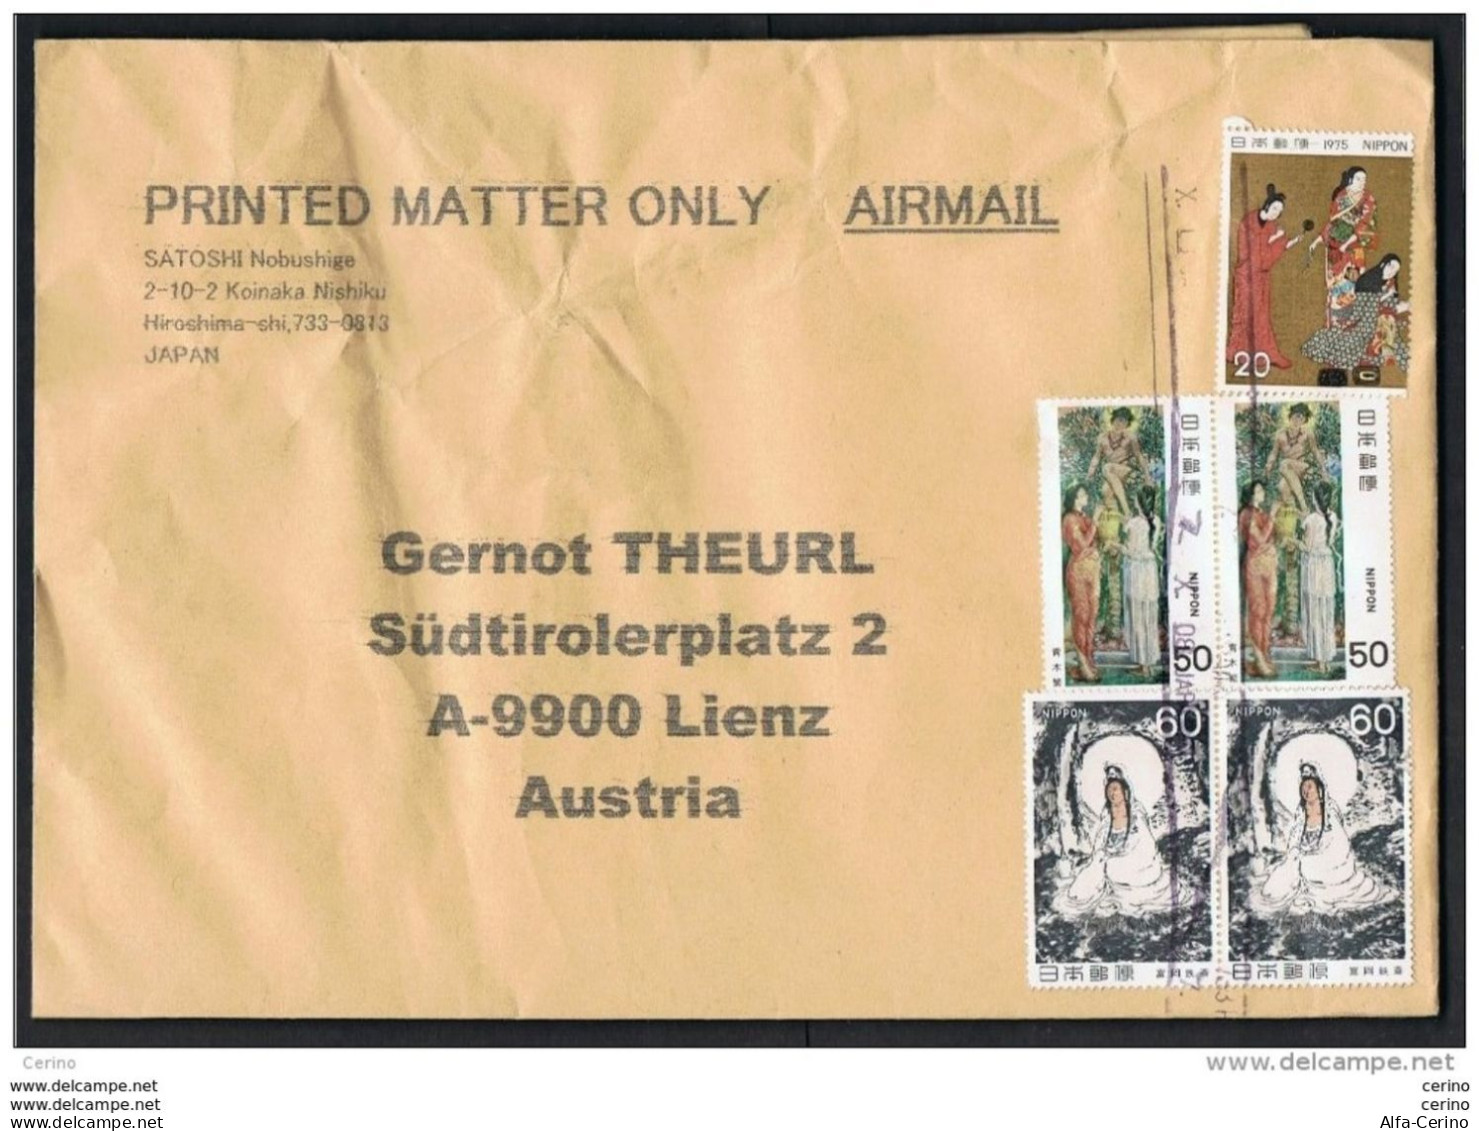 JAPAN:  2008  LARGE  ENVELOPE  BY  AIR  MAIL -  YV/TELL. 1152 +1291 COUPLE + 1421 COUPLE  -  TO  AUSTRIA - Briefe U. Dokumente